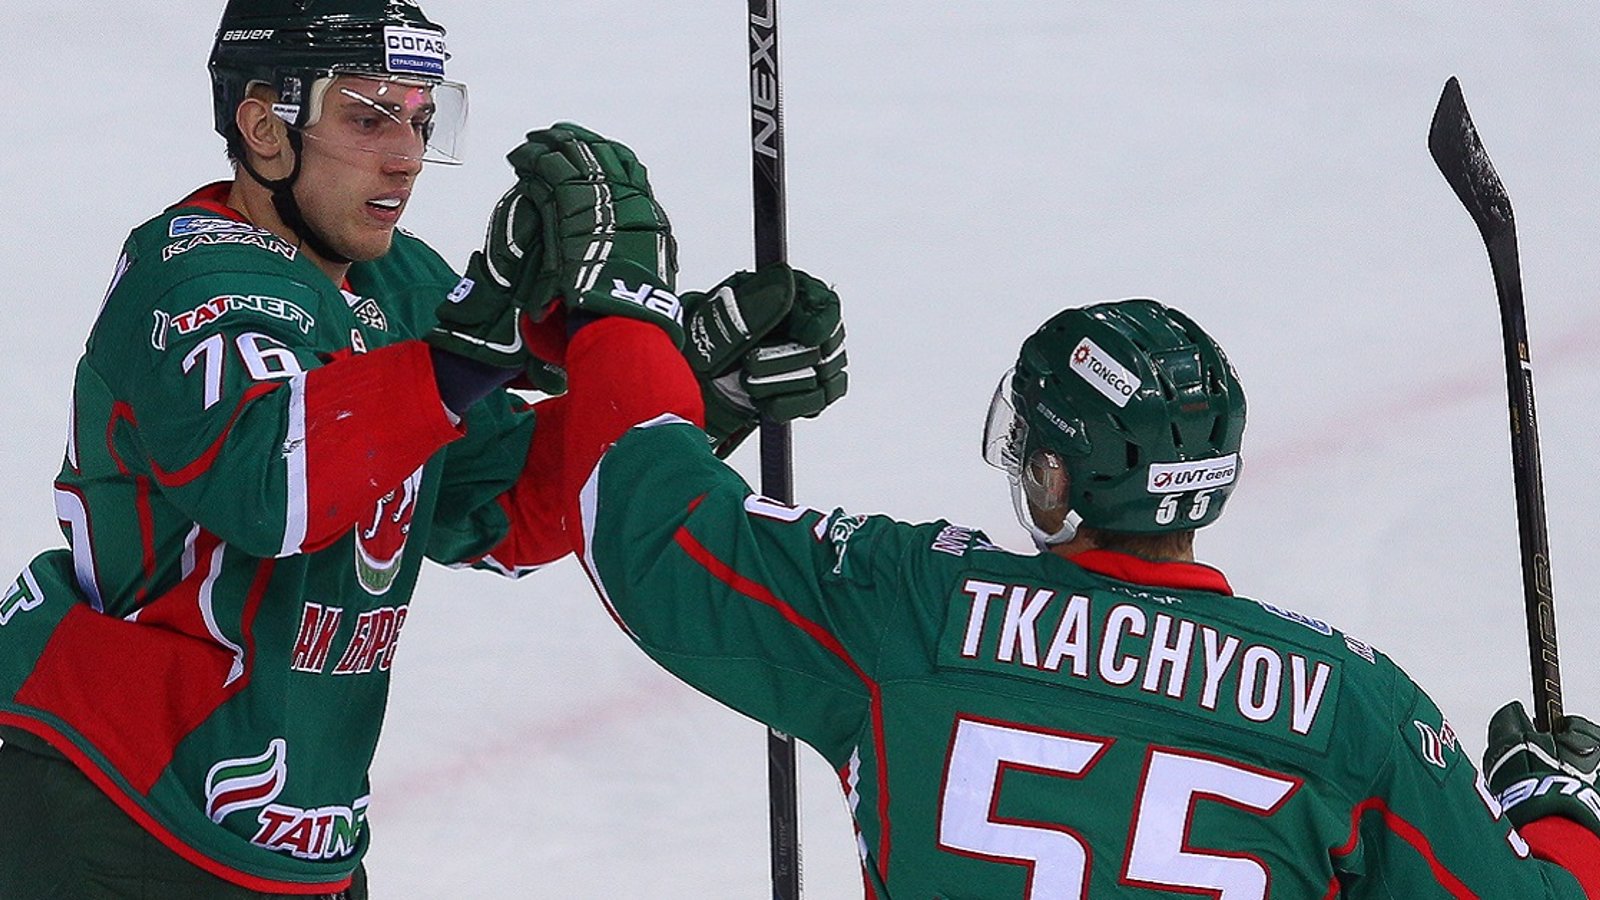 Leafs reportedly interested in acquiring KHL forward.